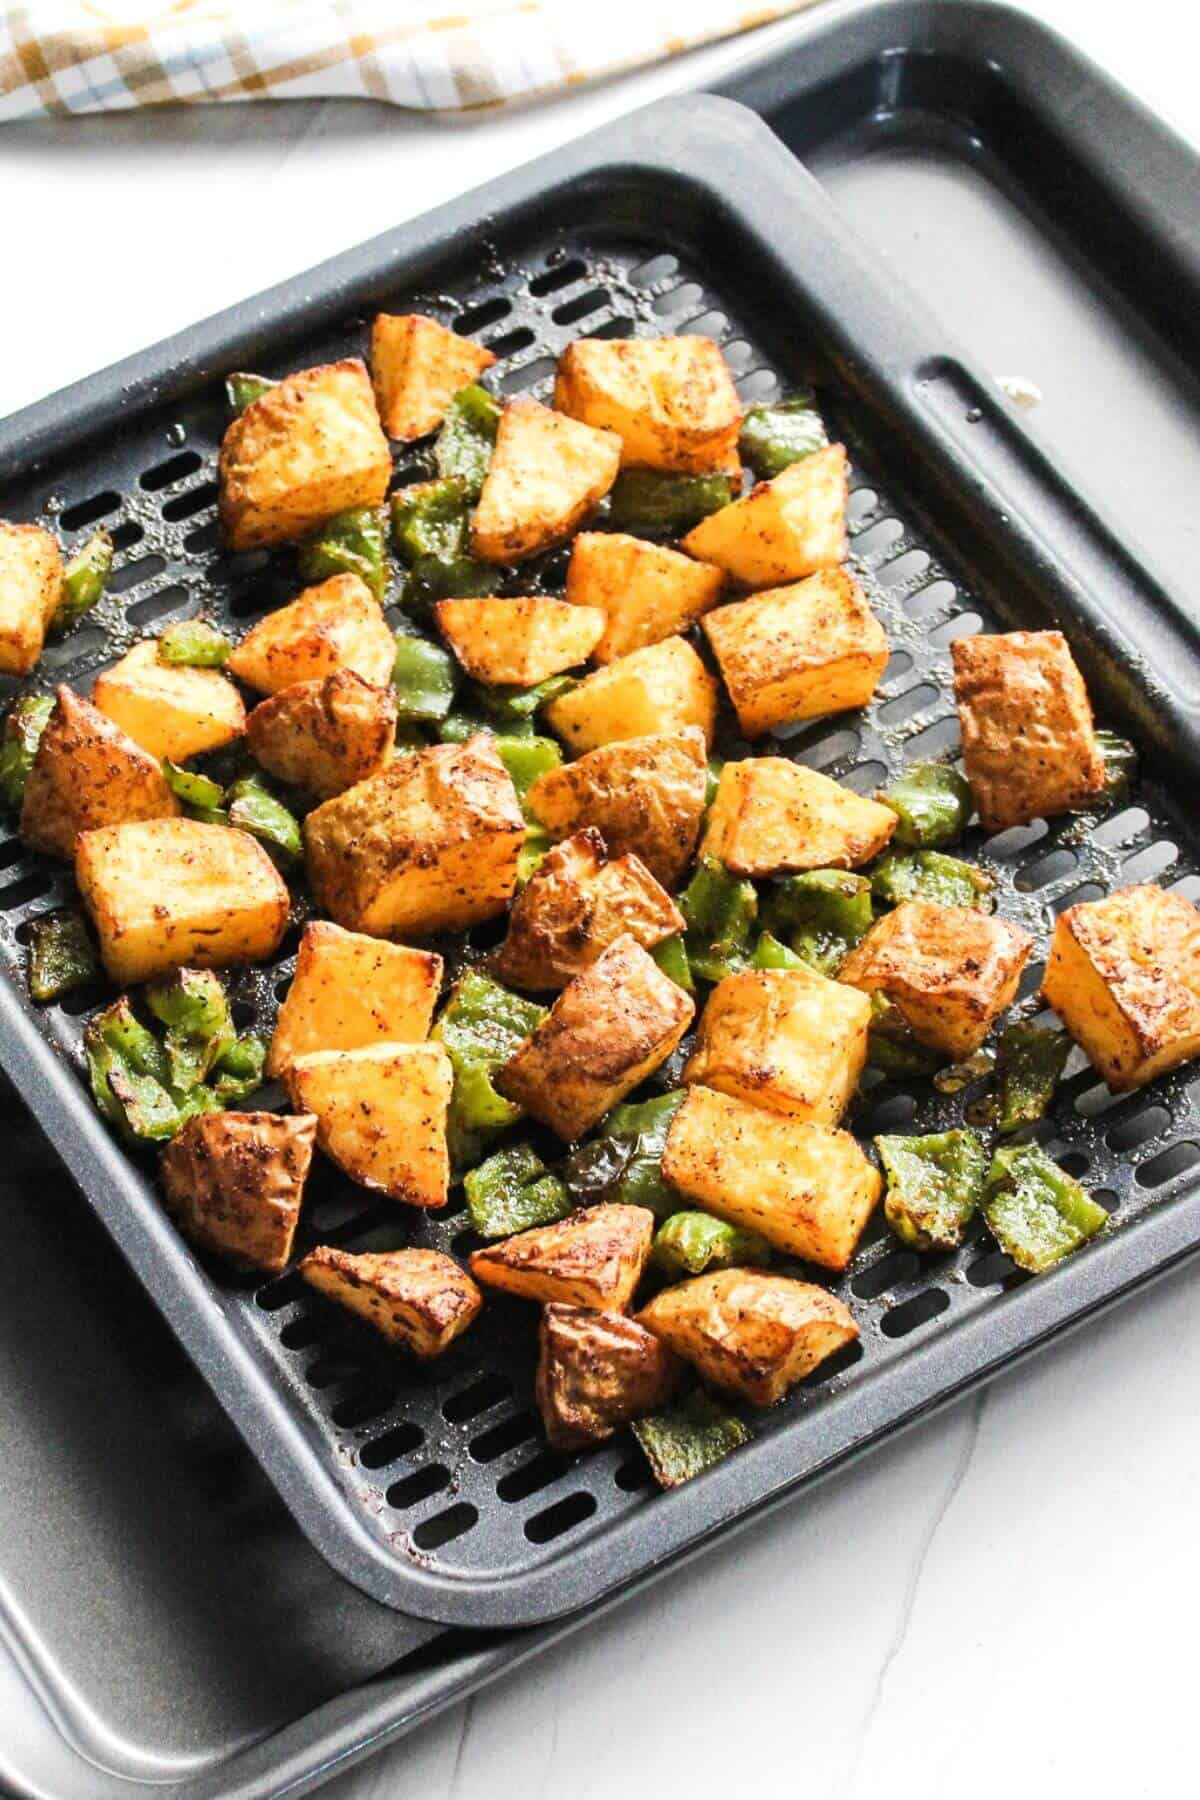 Cooked home fries in air fryer tray.